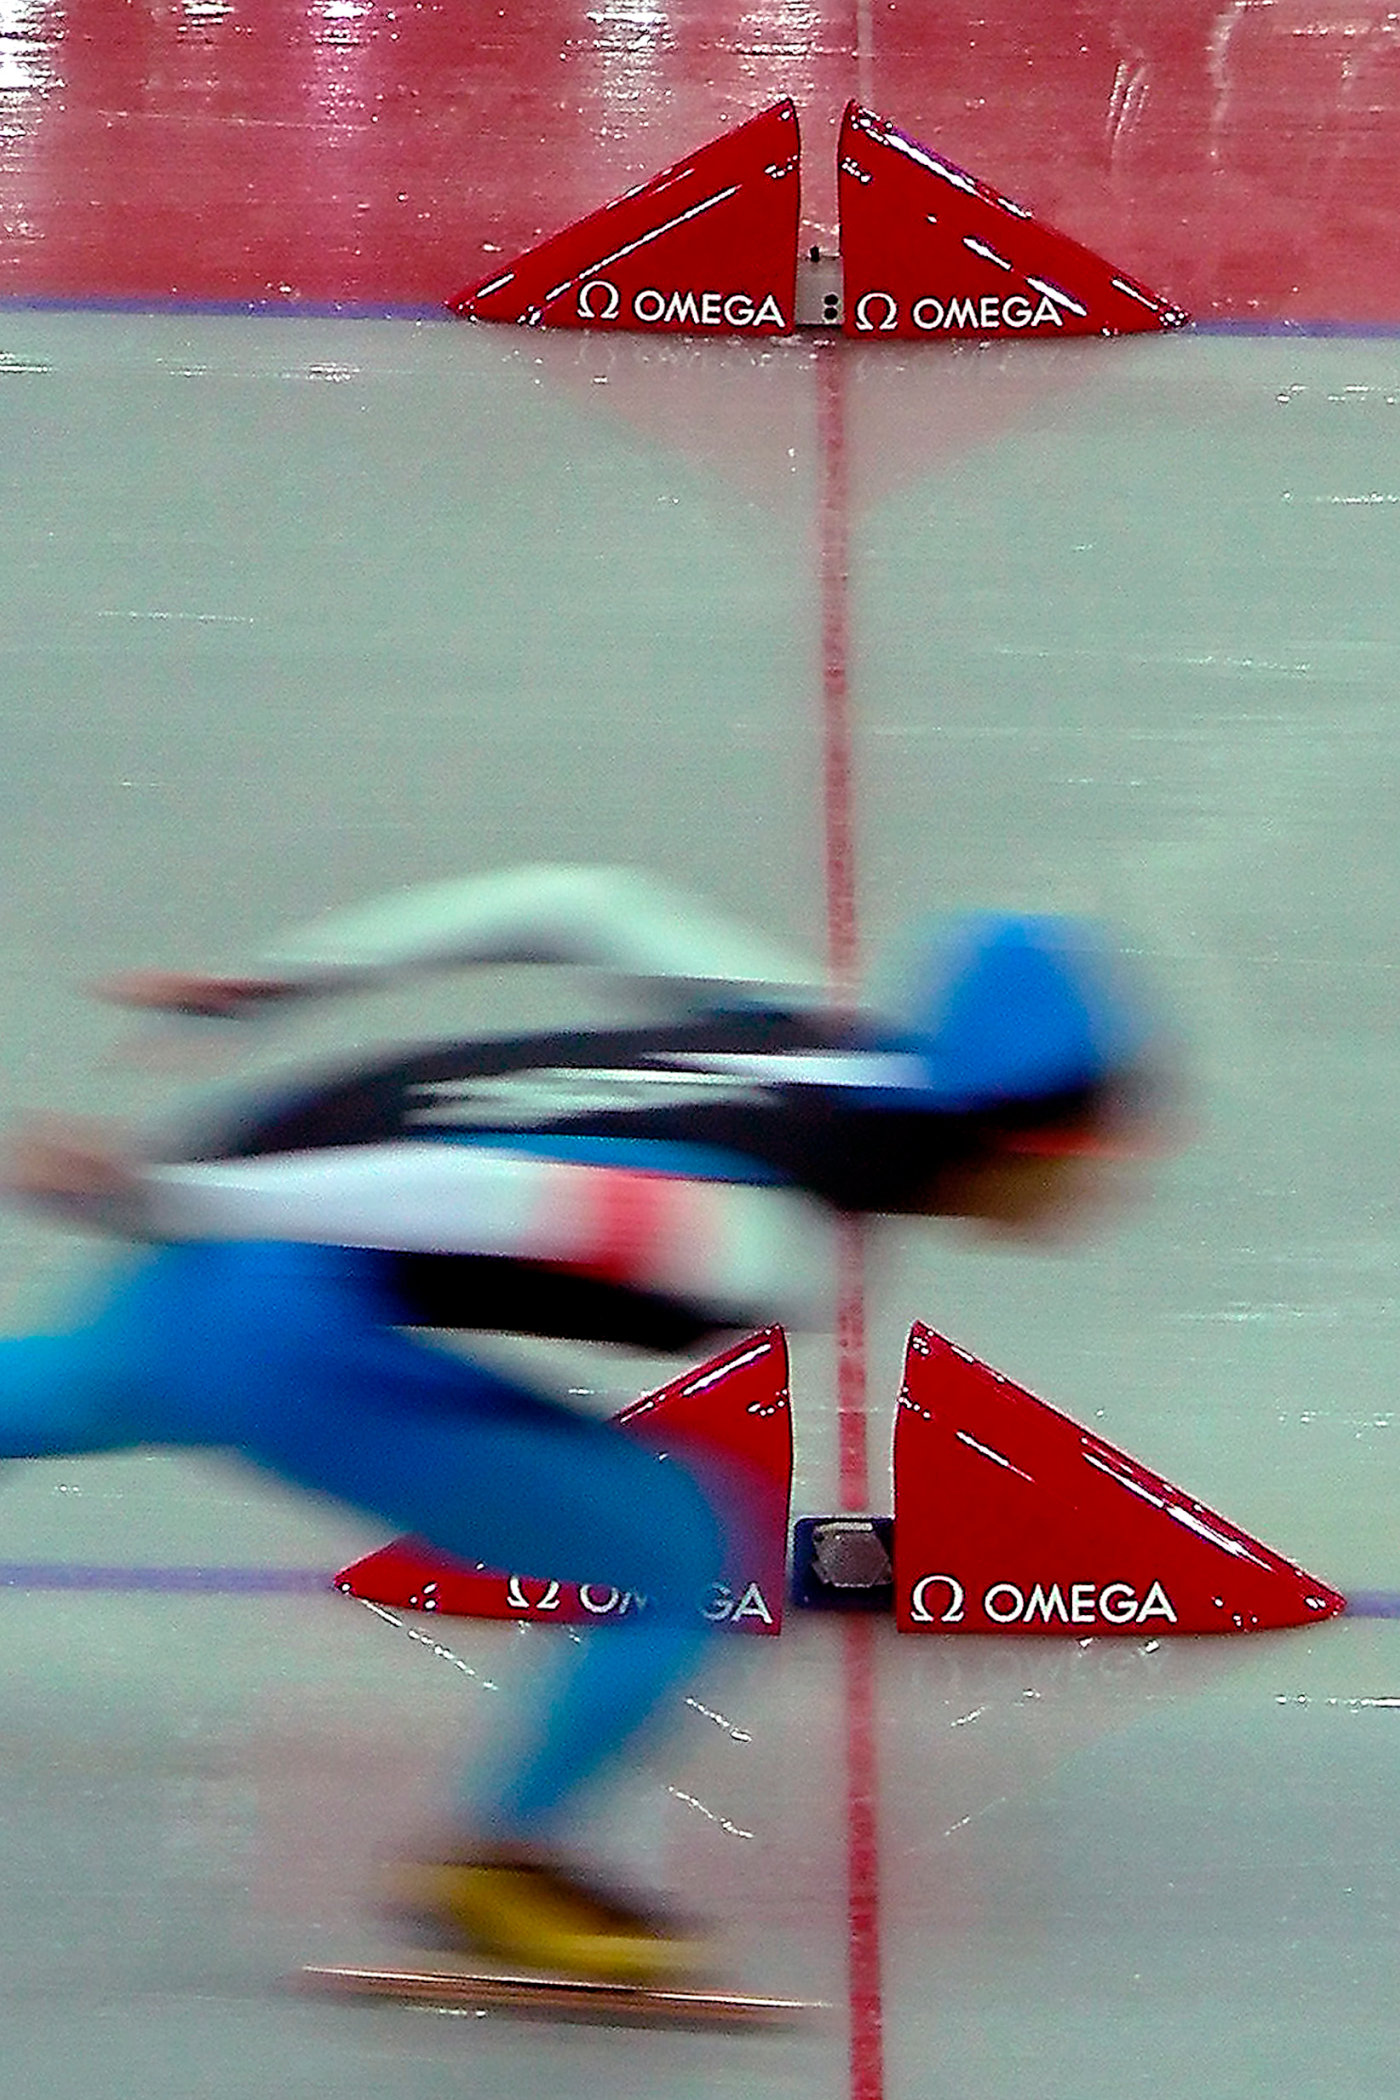 A speed skating finish photo from the 2006 Olympics in Turin, Italy.